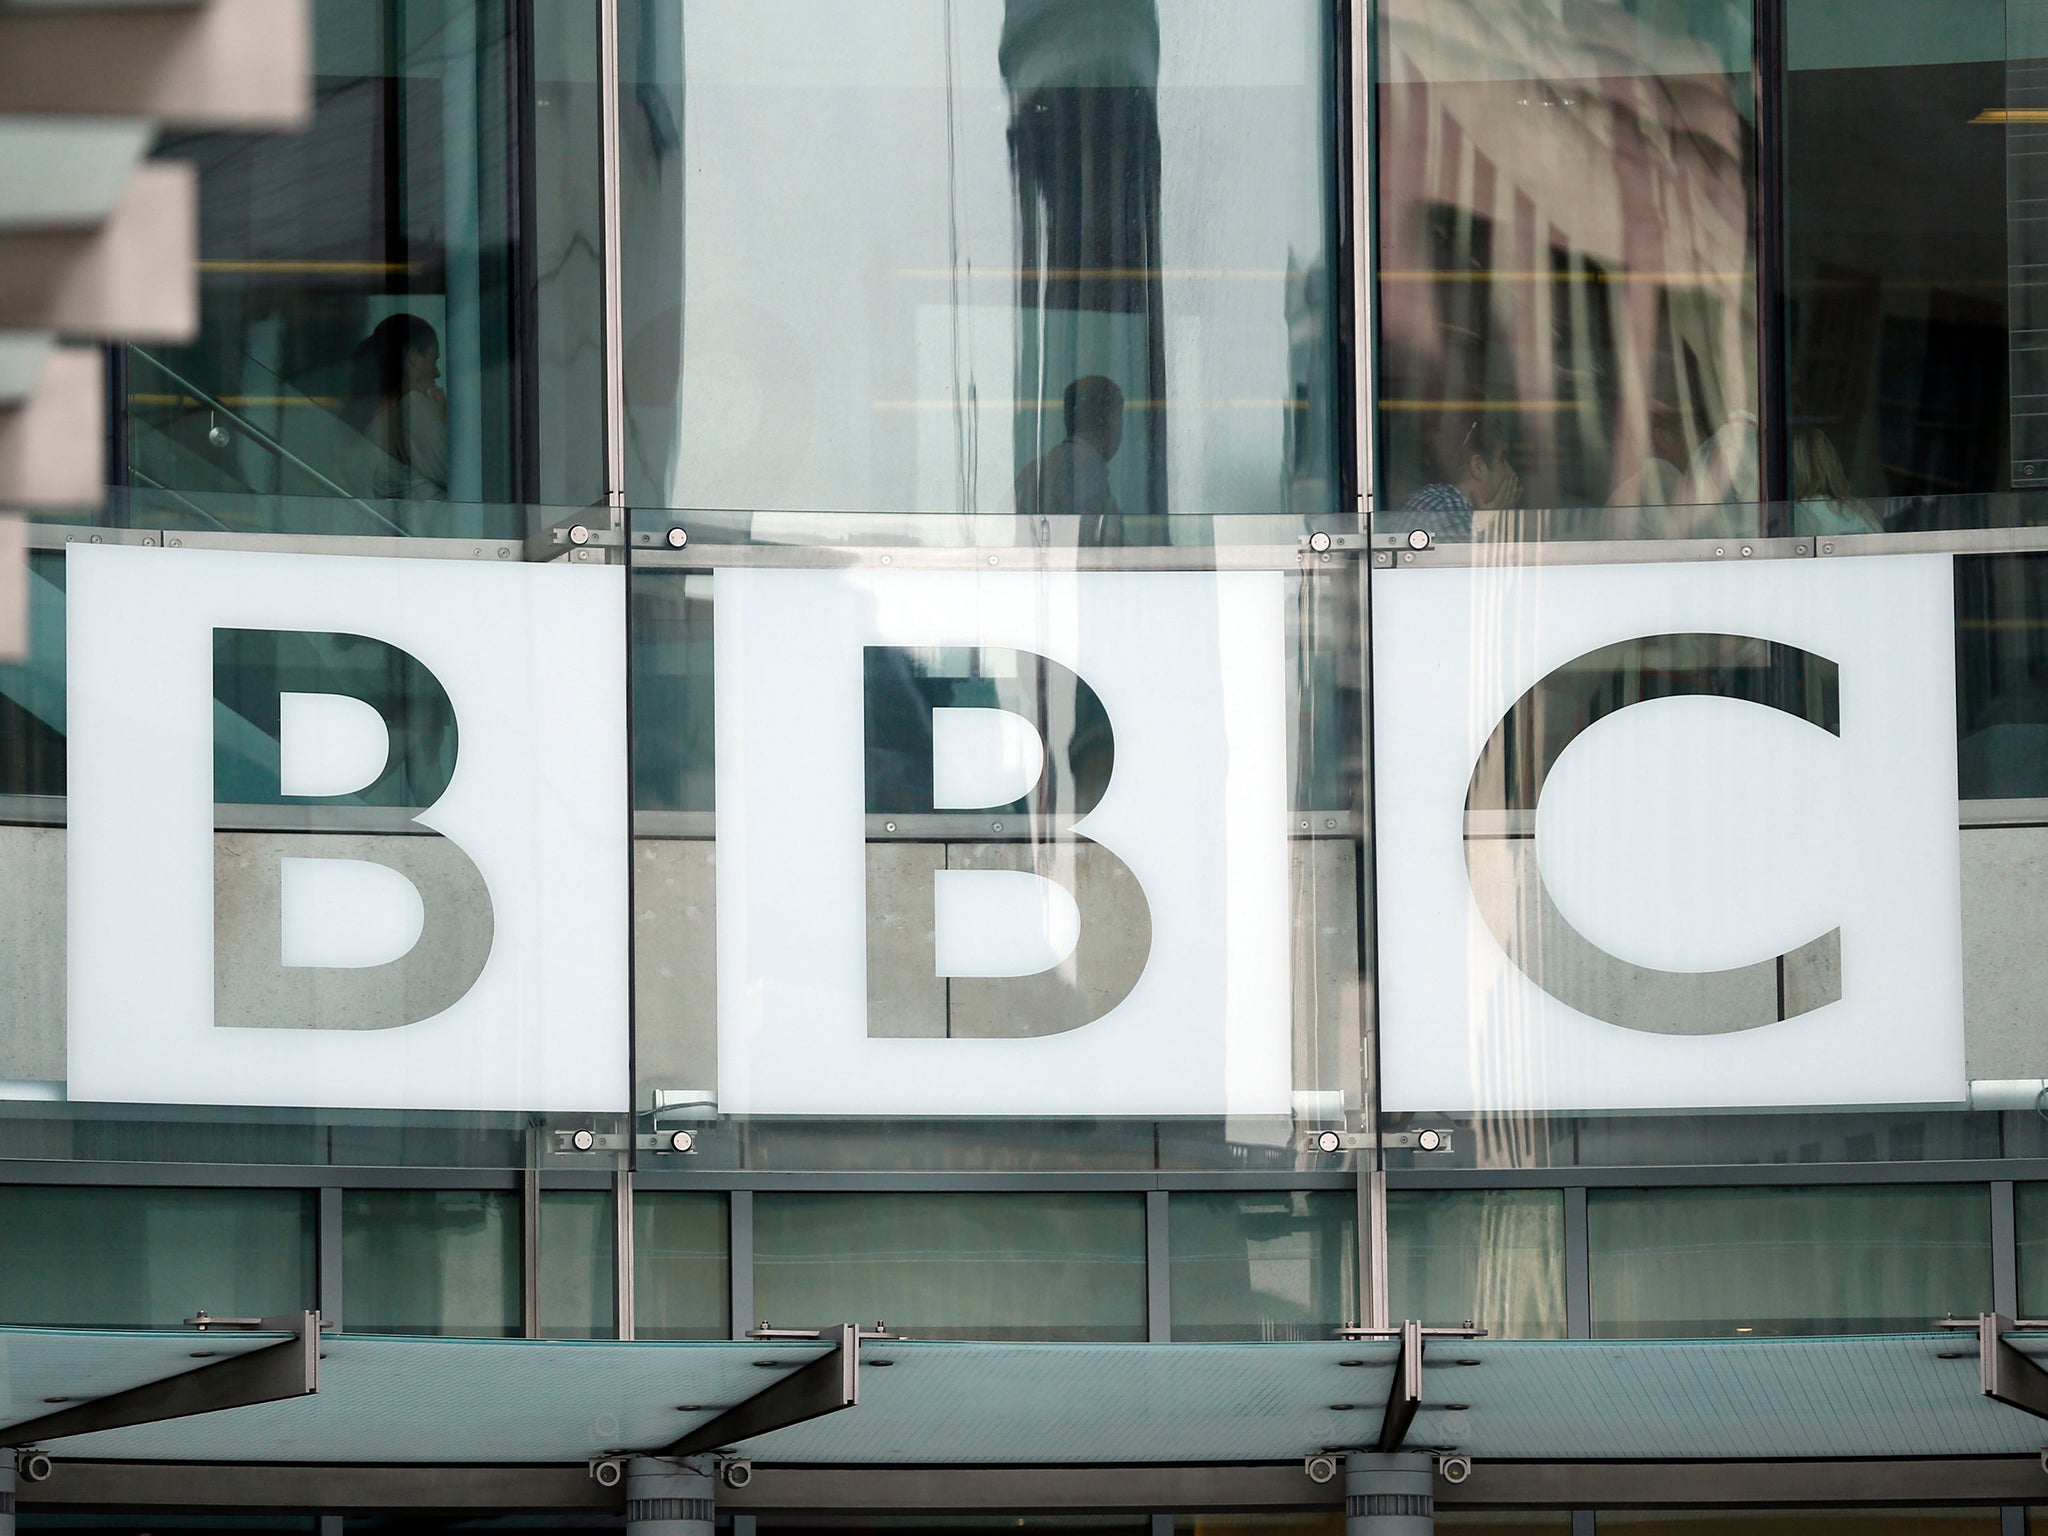 MPs have accused the BBC of being unable to break out of its 'pre-referendum pessimism'